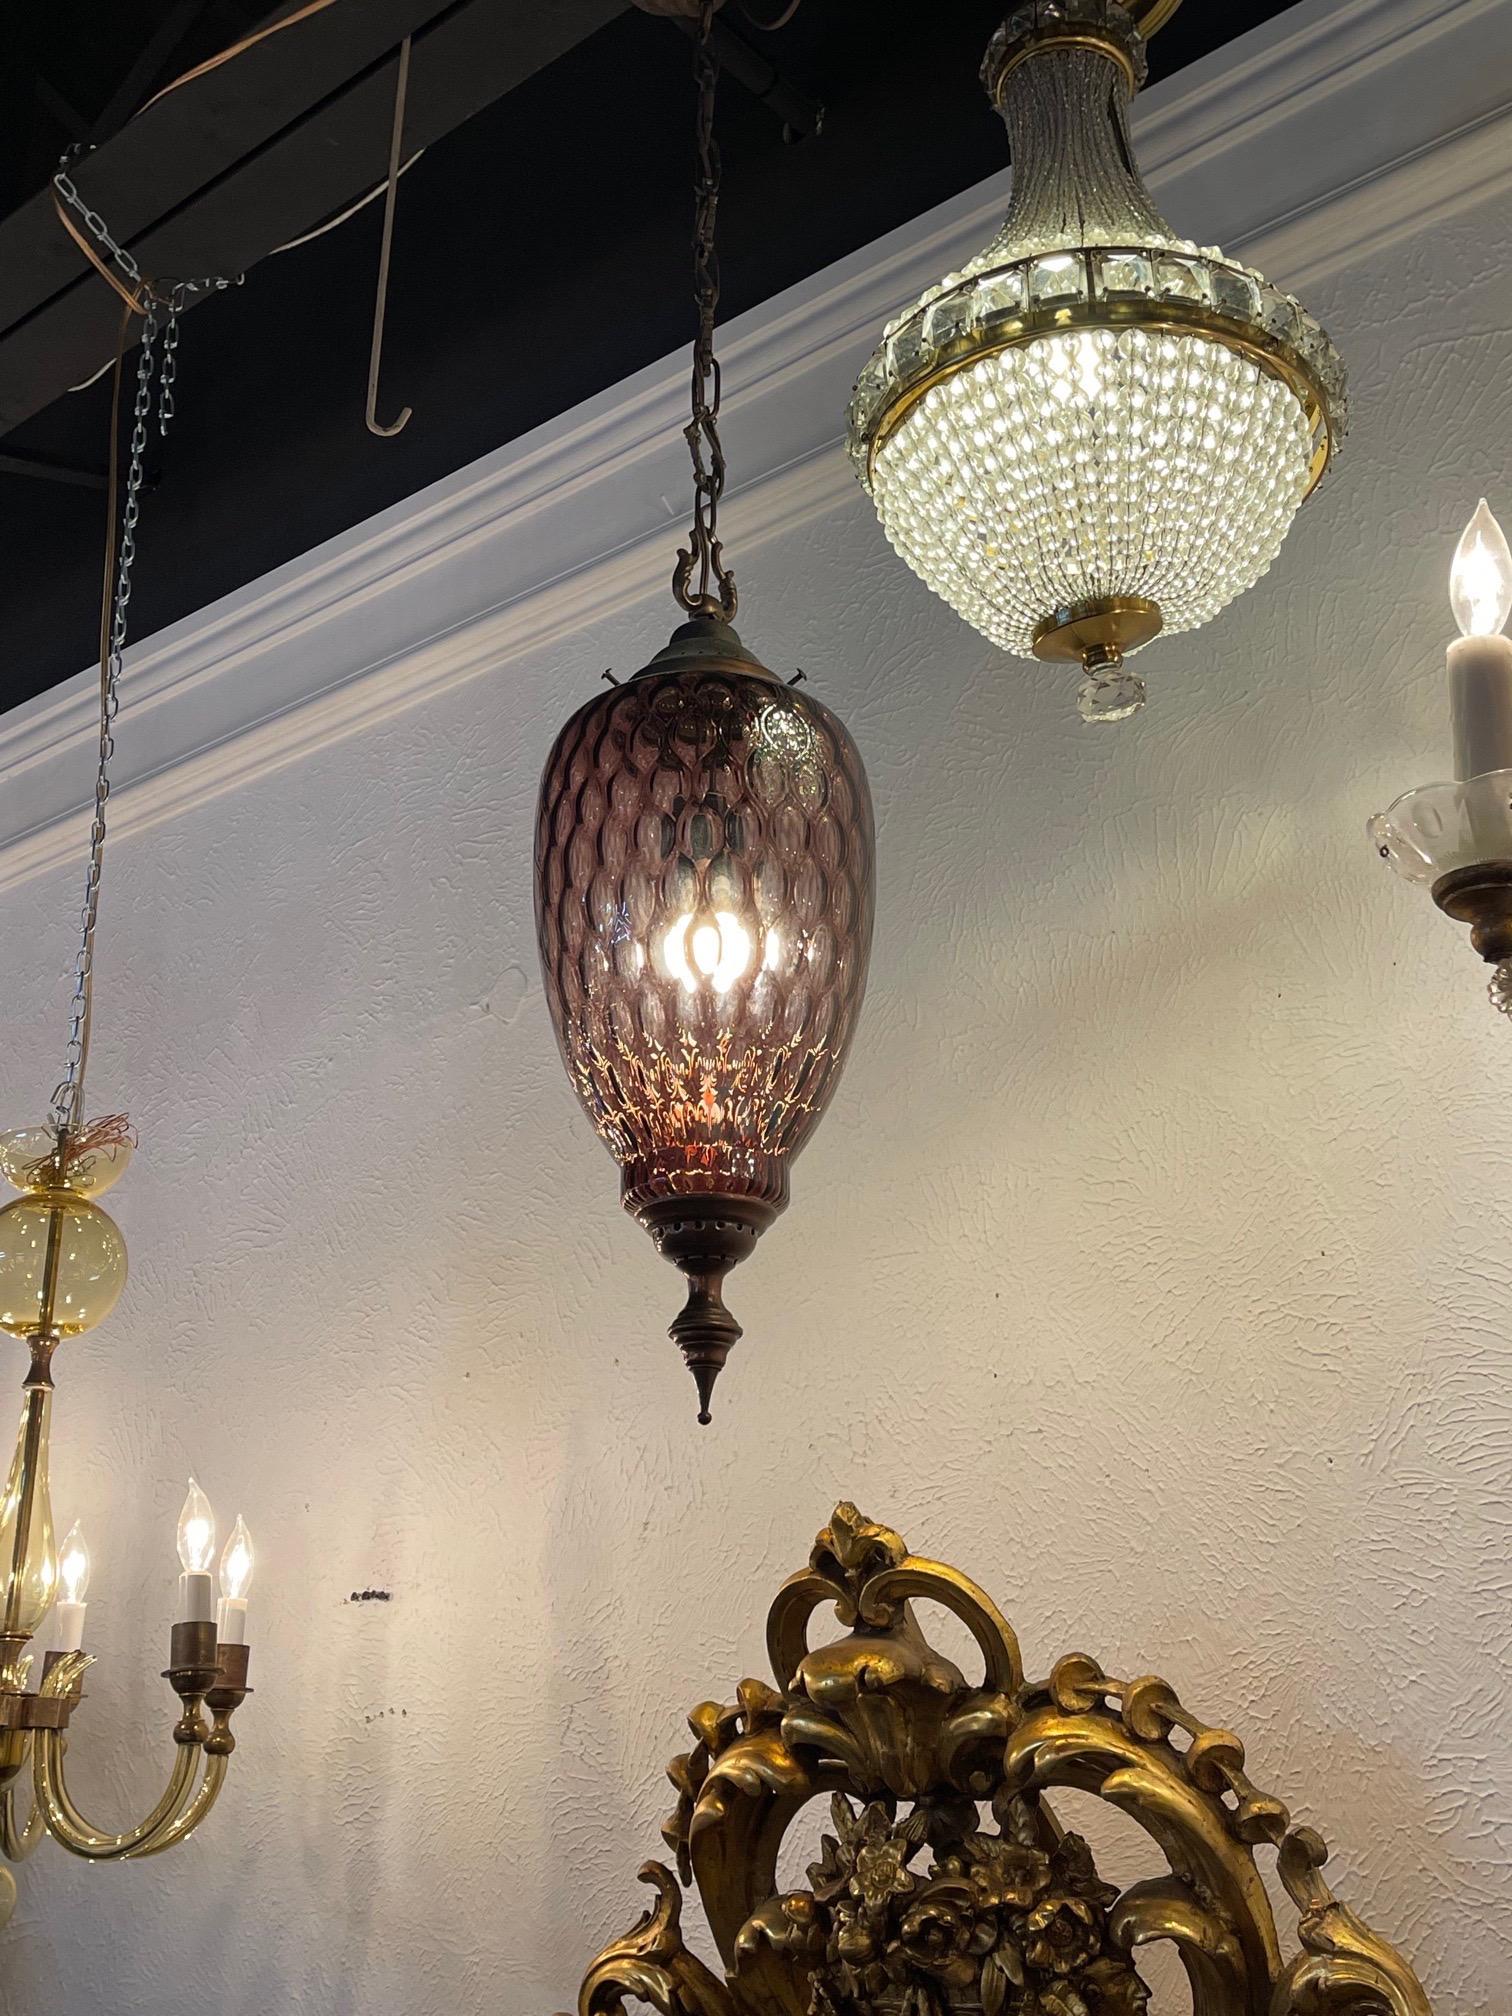 Nice vintage lavender colored Murano glass lantern. This piece has pretty textured glass. Creates an interesting vibe!